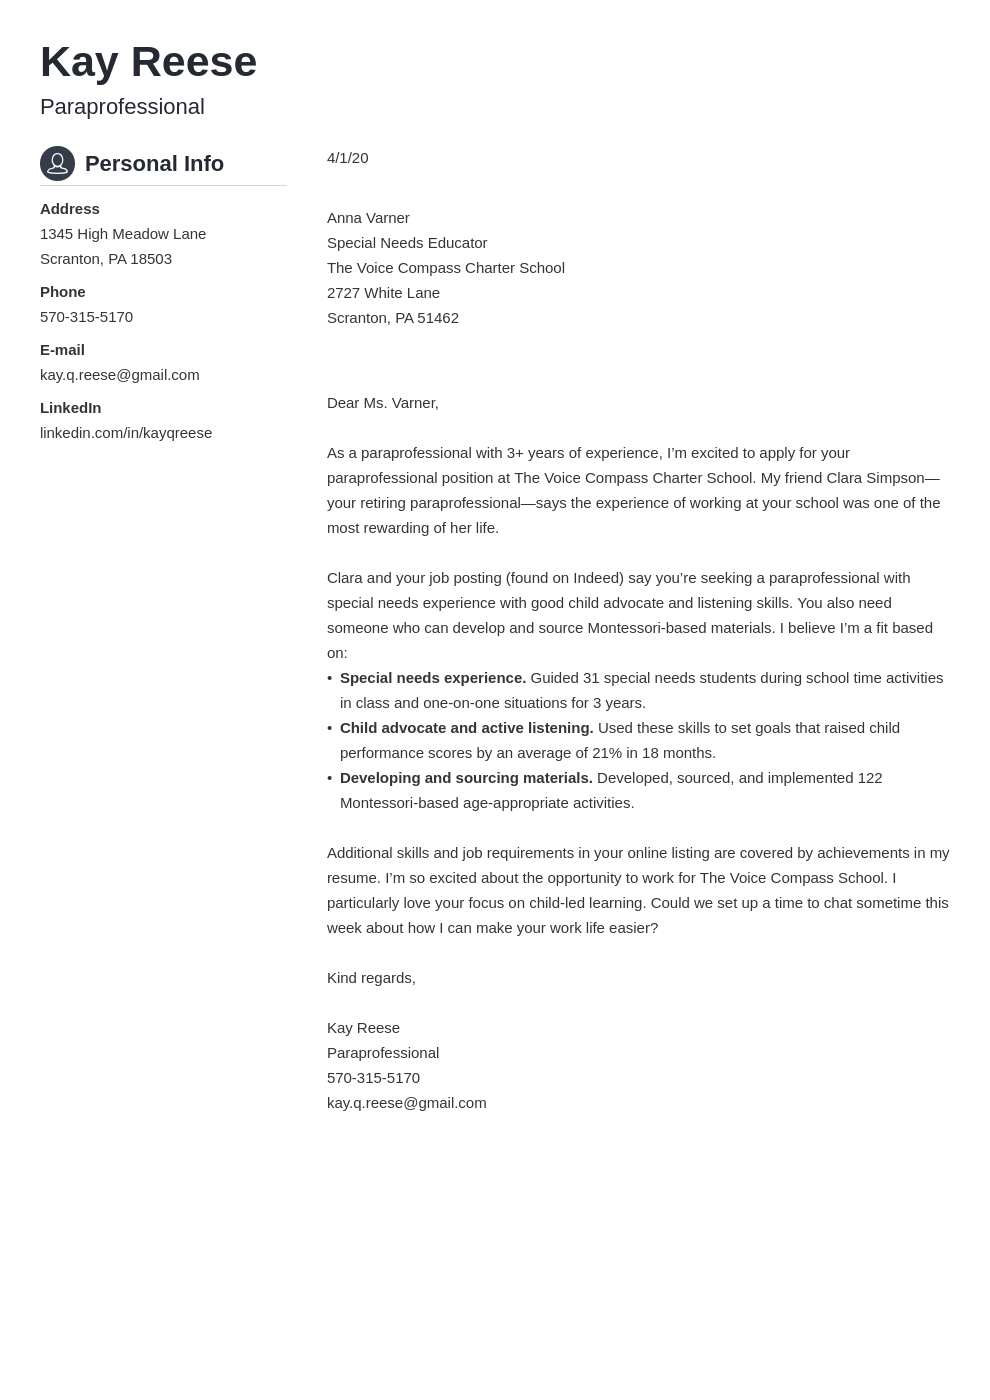 sample cover letter for paraprofessional job